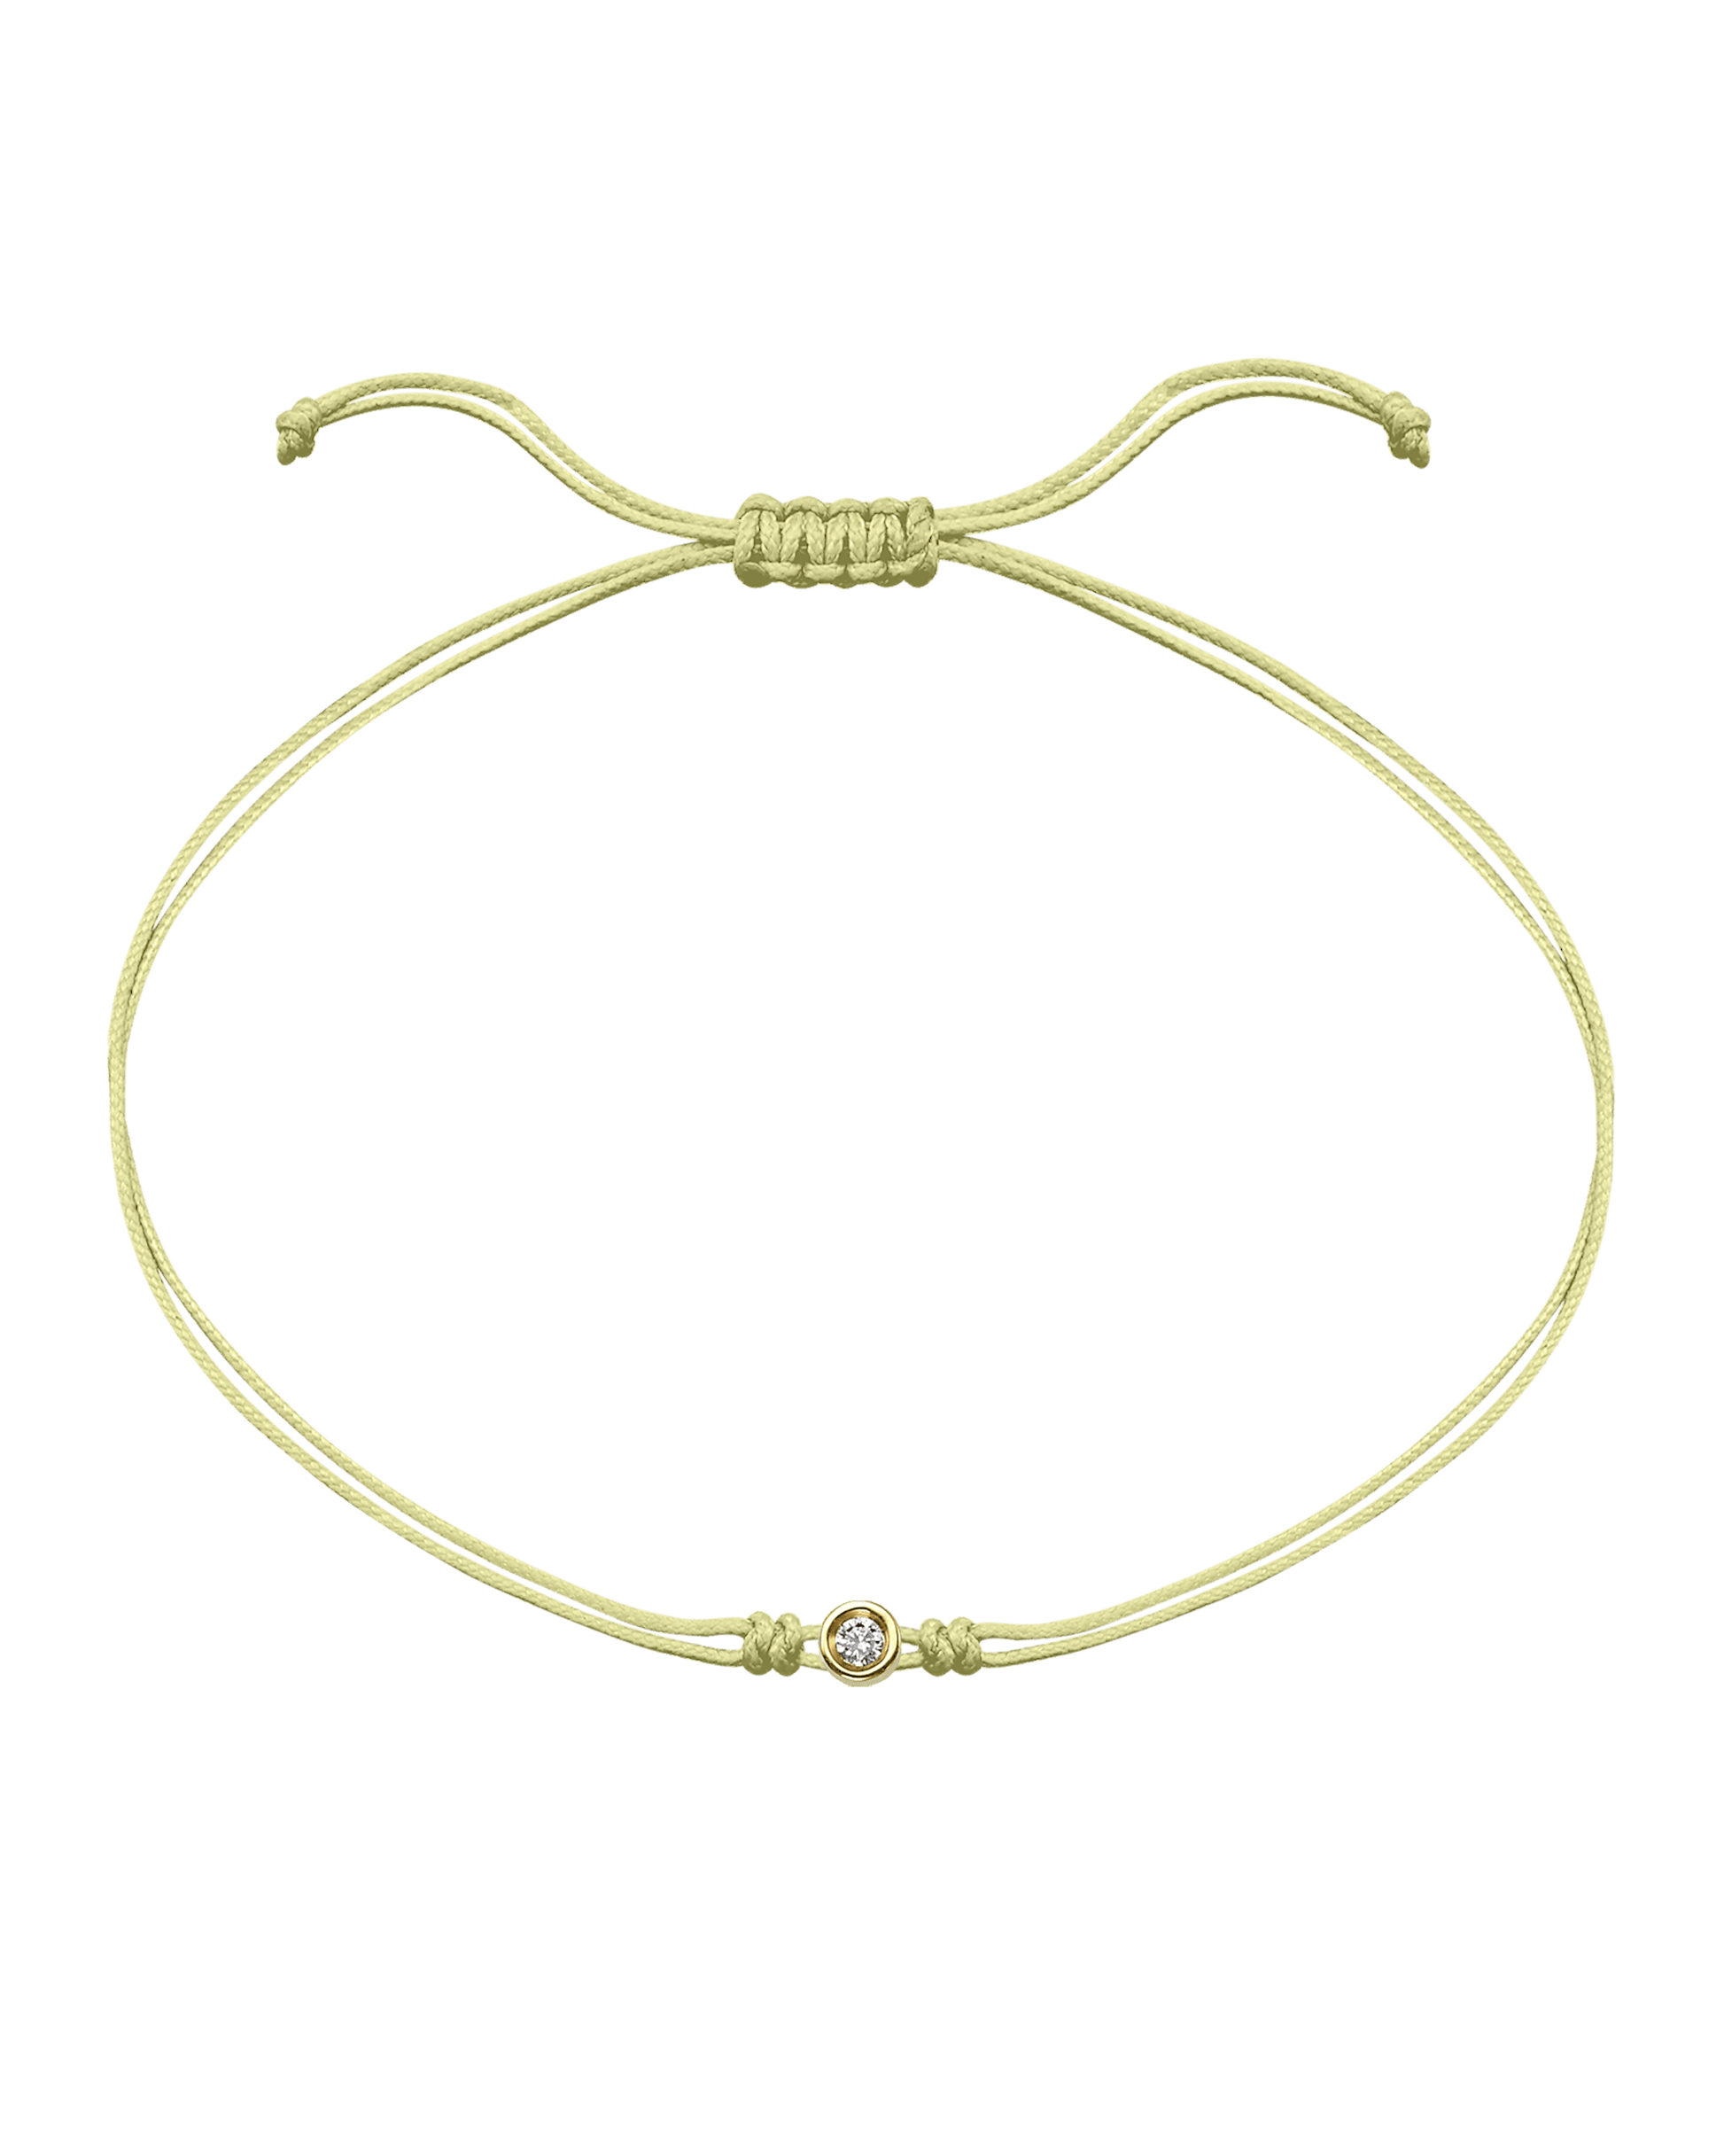 Summer Edition : The Classic String of Love - 14K Yellow Gold Bracelets magal-dev Tropical Cosmopolitan - Light Yellow Small: 0.03ct 